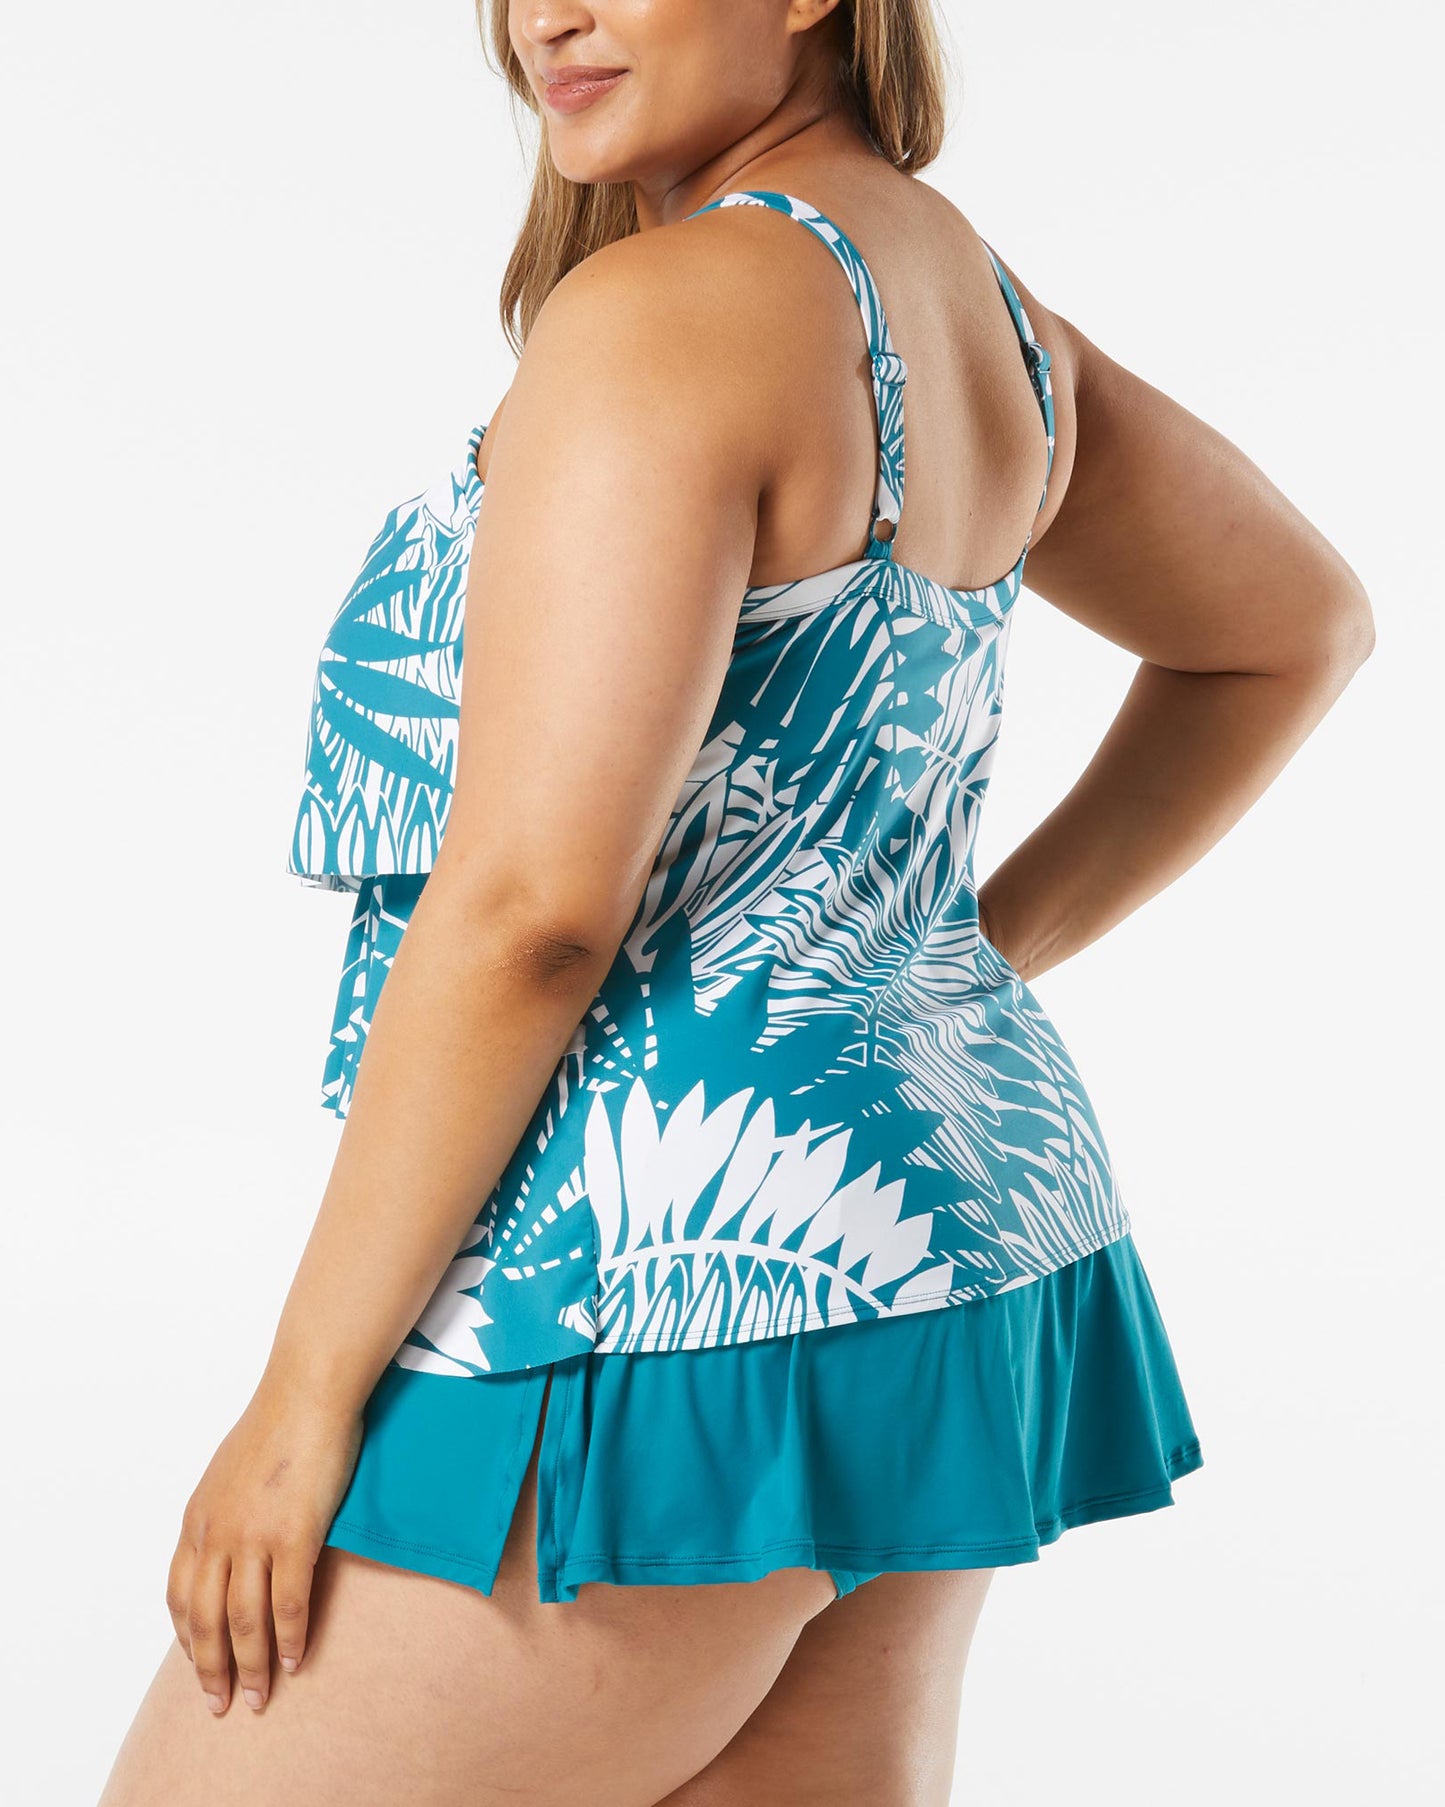 Model wearing a plus sized triple tiered tankini top in a turquoise and white palm frond print